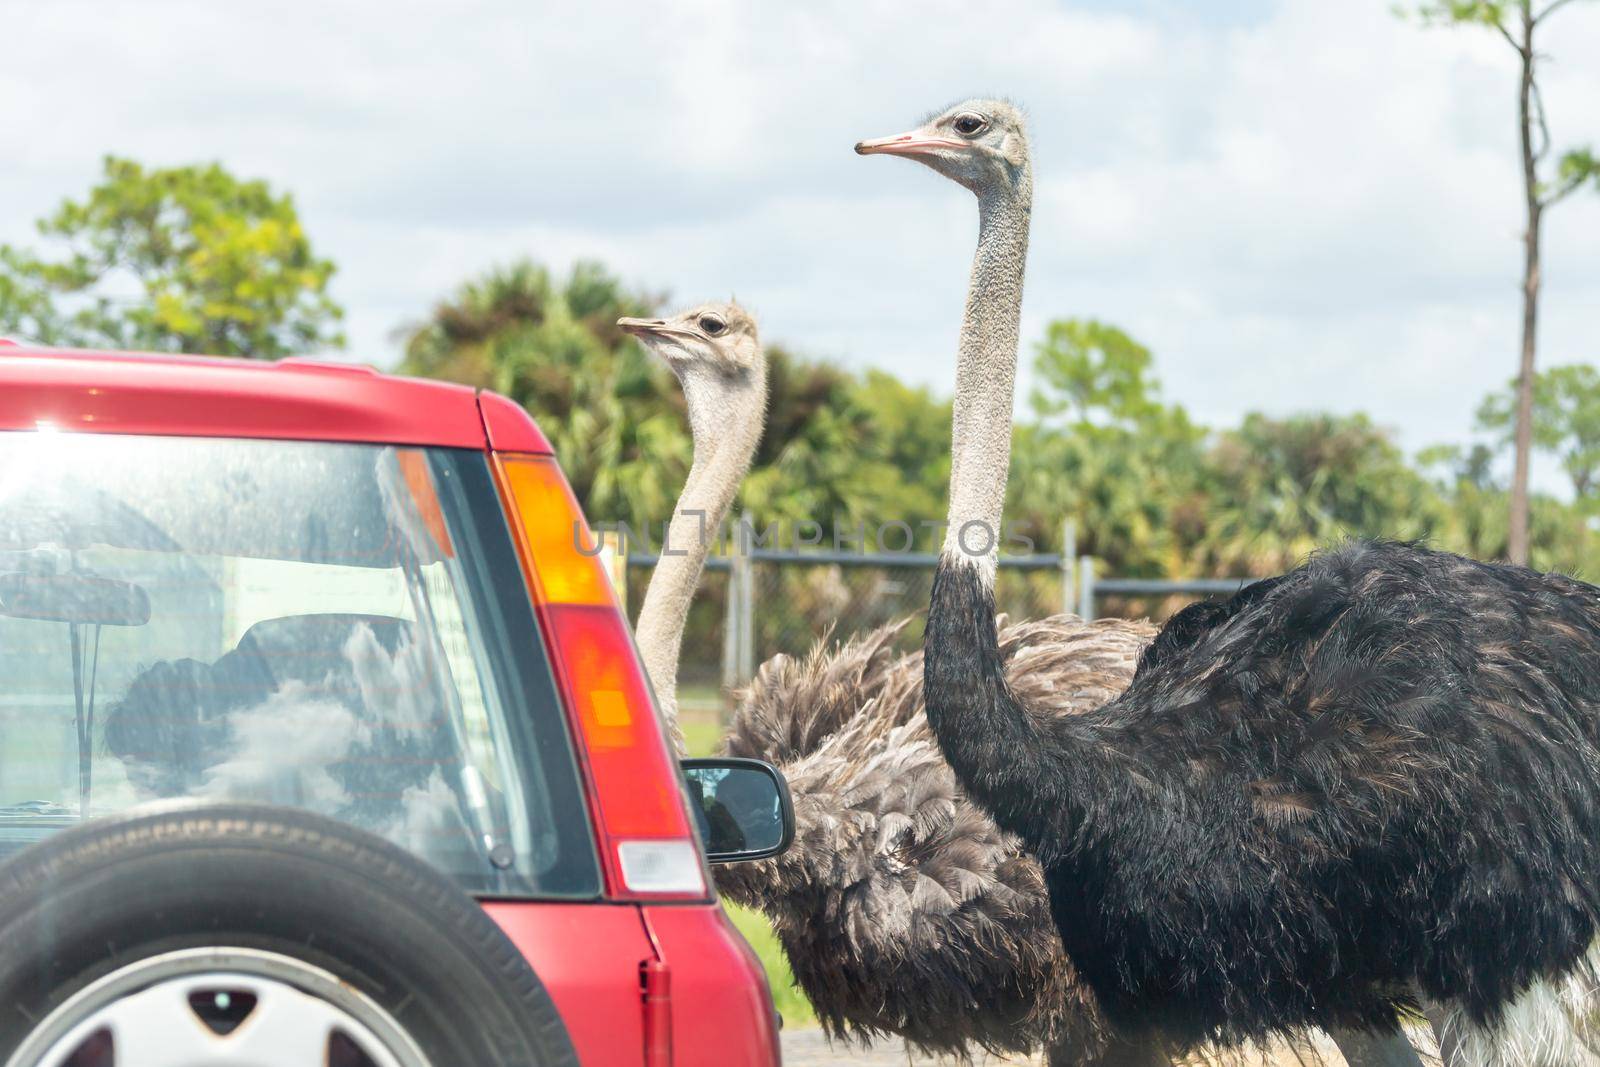 Safari drive through park. Cars driving near ostriches in cage free animal zoo by Mariakray